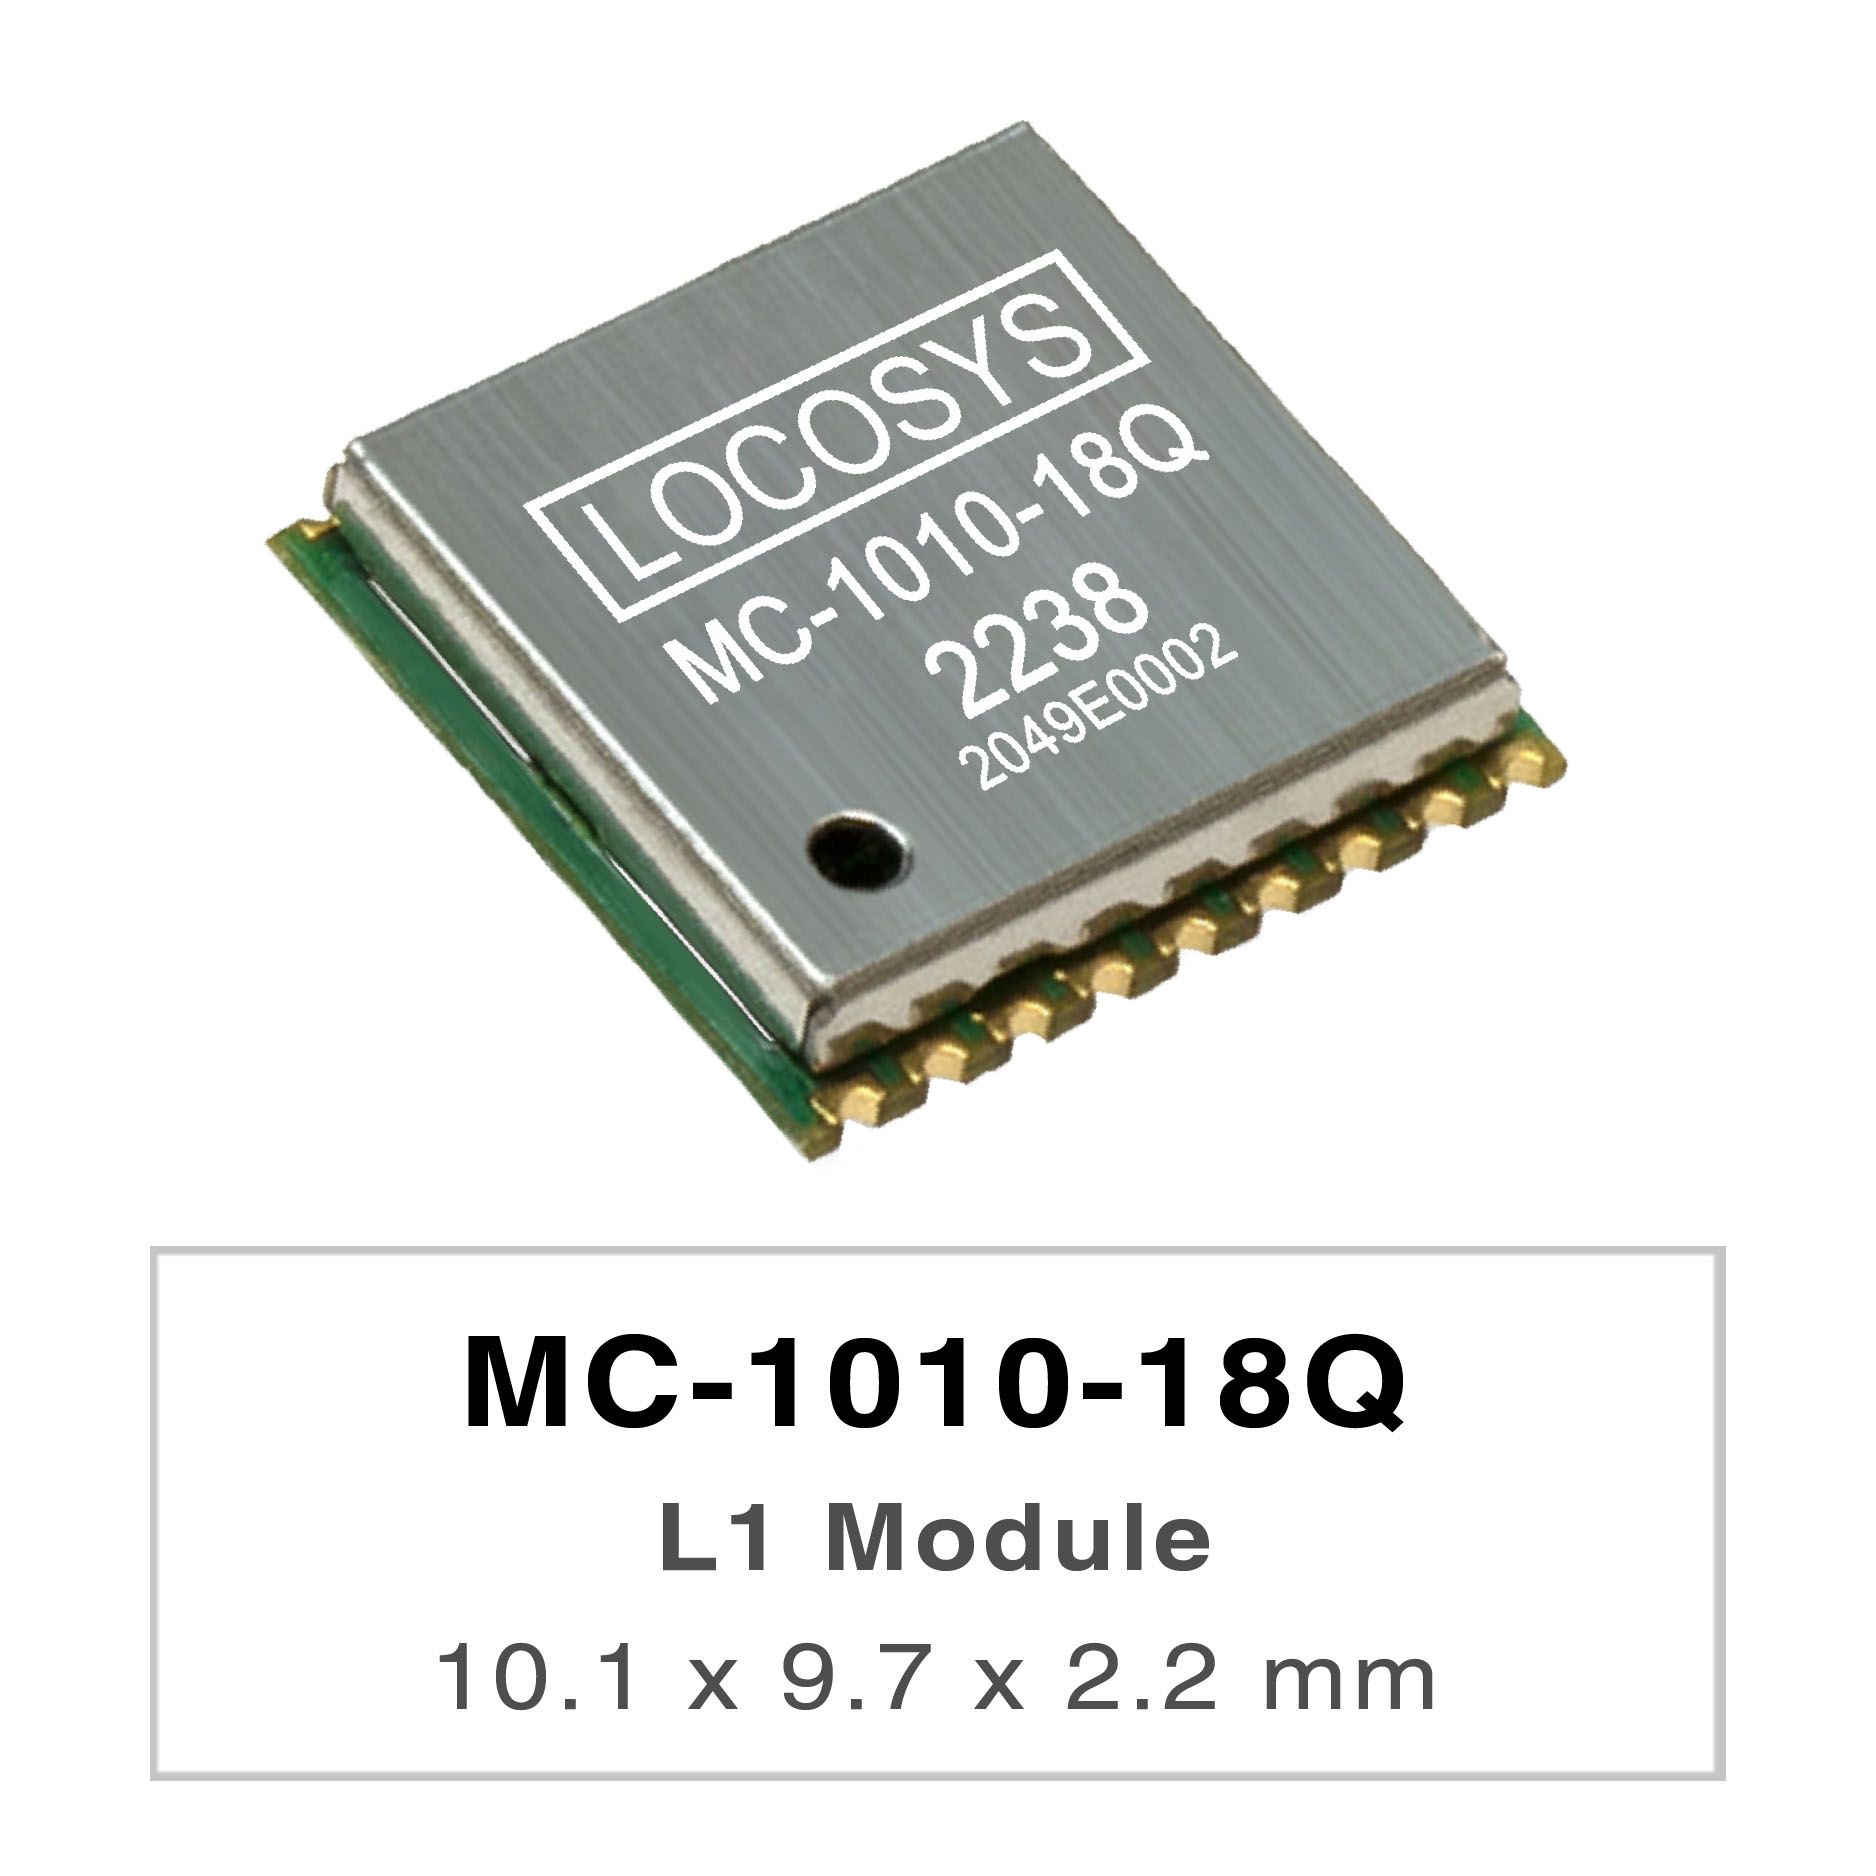 LOCOSYS MC-1010-18Q is a complete standalone GNSS module.